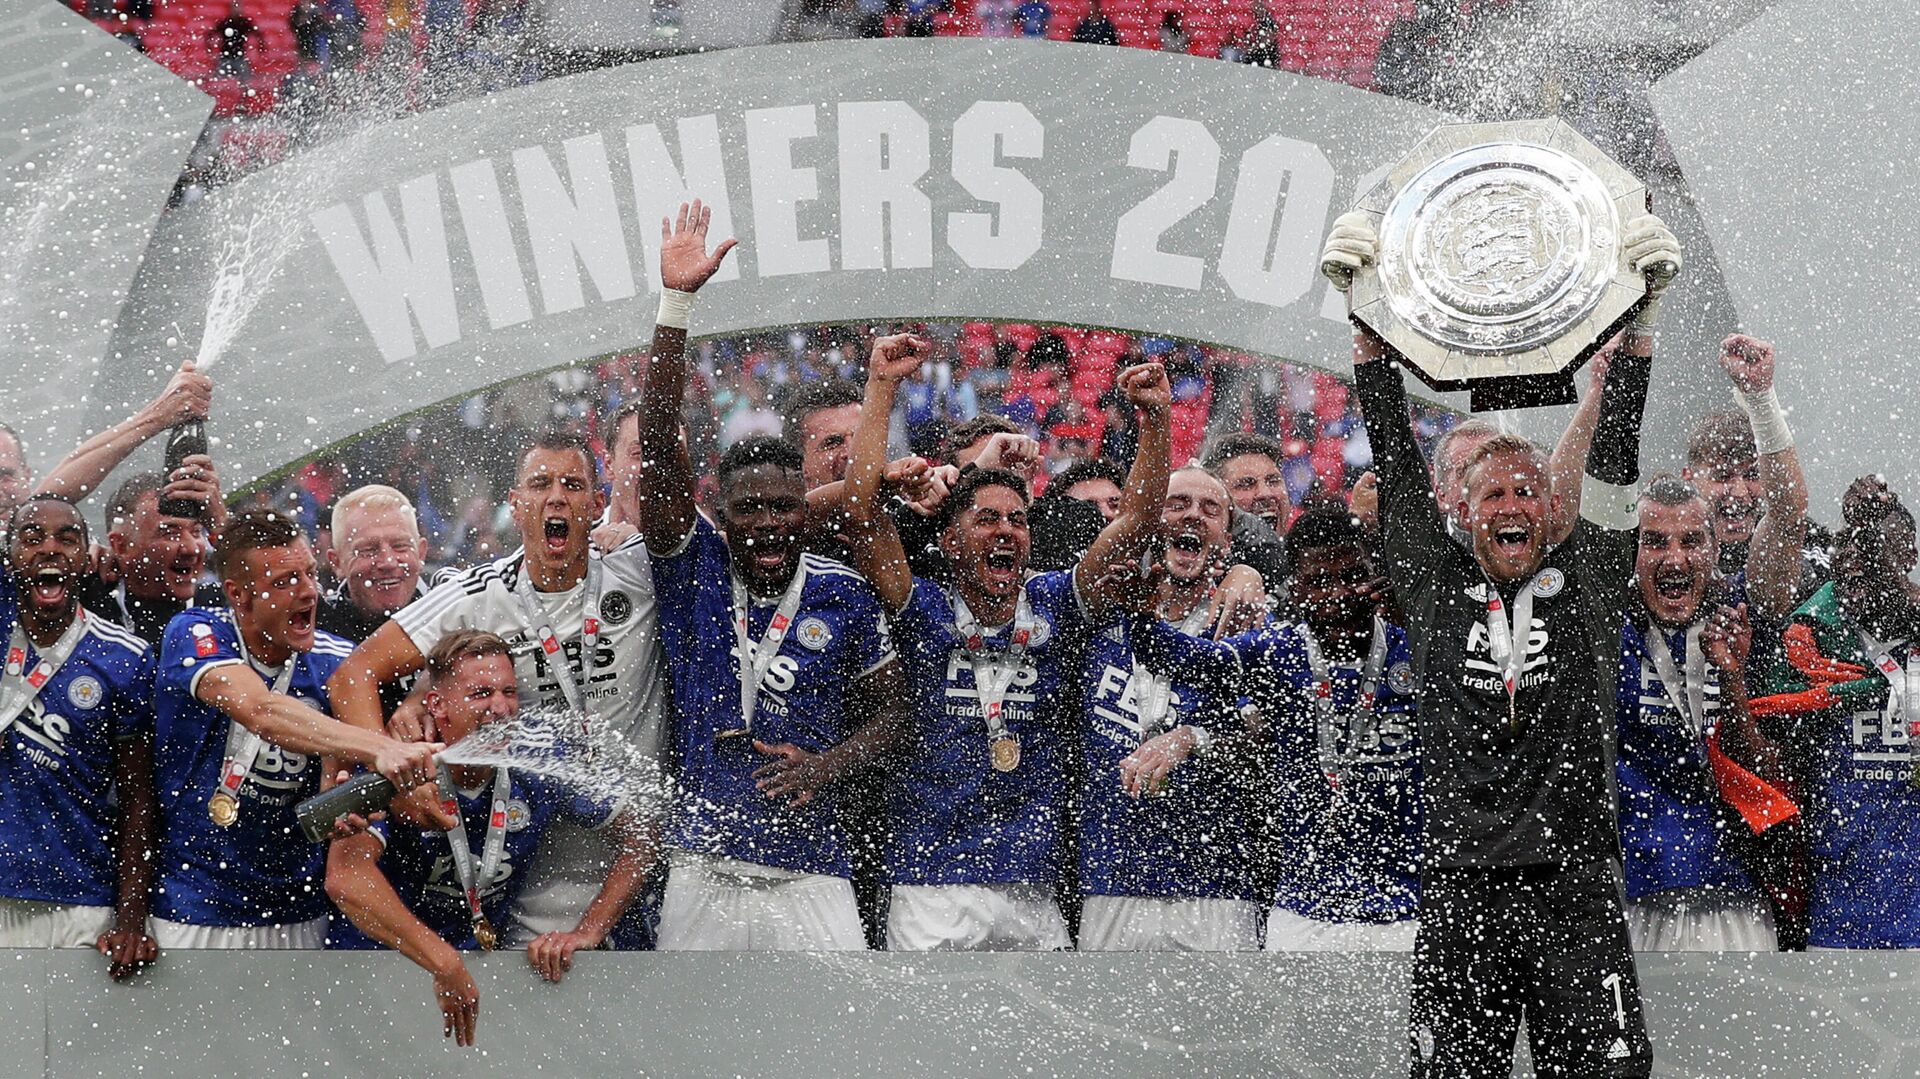 Leicester City's Danish goalkeeper Kasper Schmeichel holds aloft the Community Shield trophy after Leicester City won the English FA Community Shield football match between Manchester City and Leicester City at Wembley Stadium in north London on August 7, 2021. (Photo by Adrian DENNIS / AFP) / NOT FOR MARKETING OR ADVERTISING USE / RESTRICTED TO EDITORIAL USE - РИА Новости, 1920, 07.08.2021